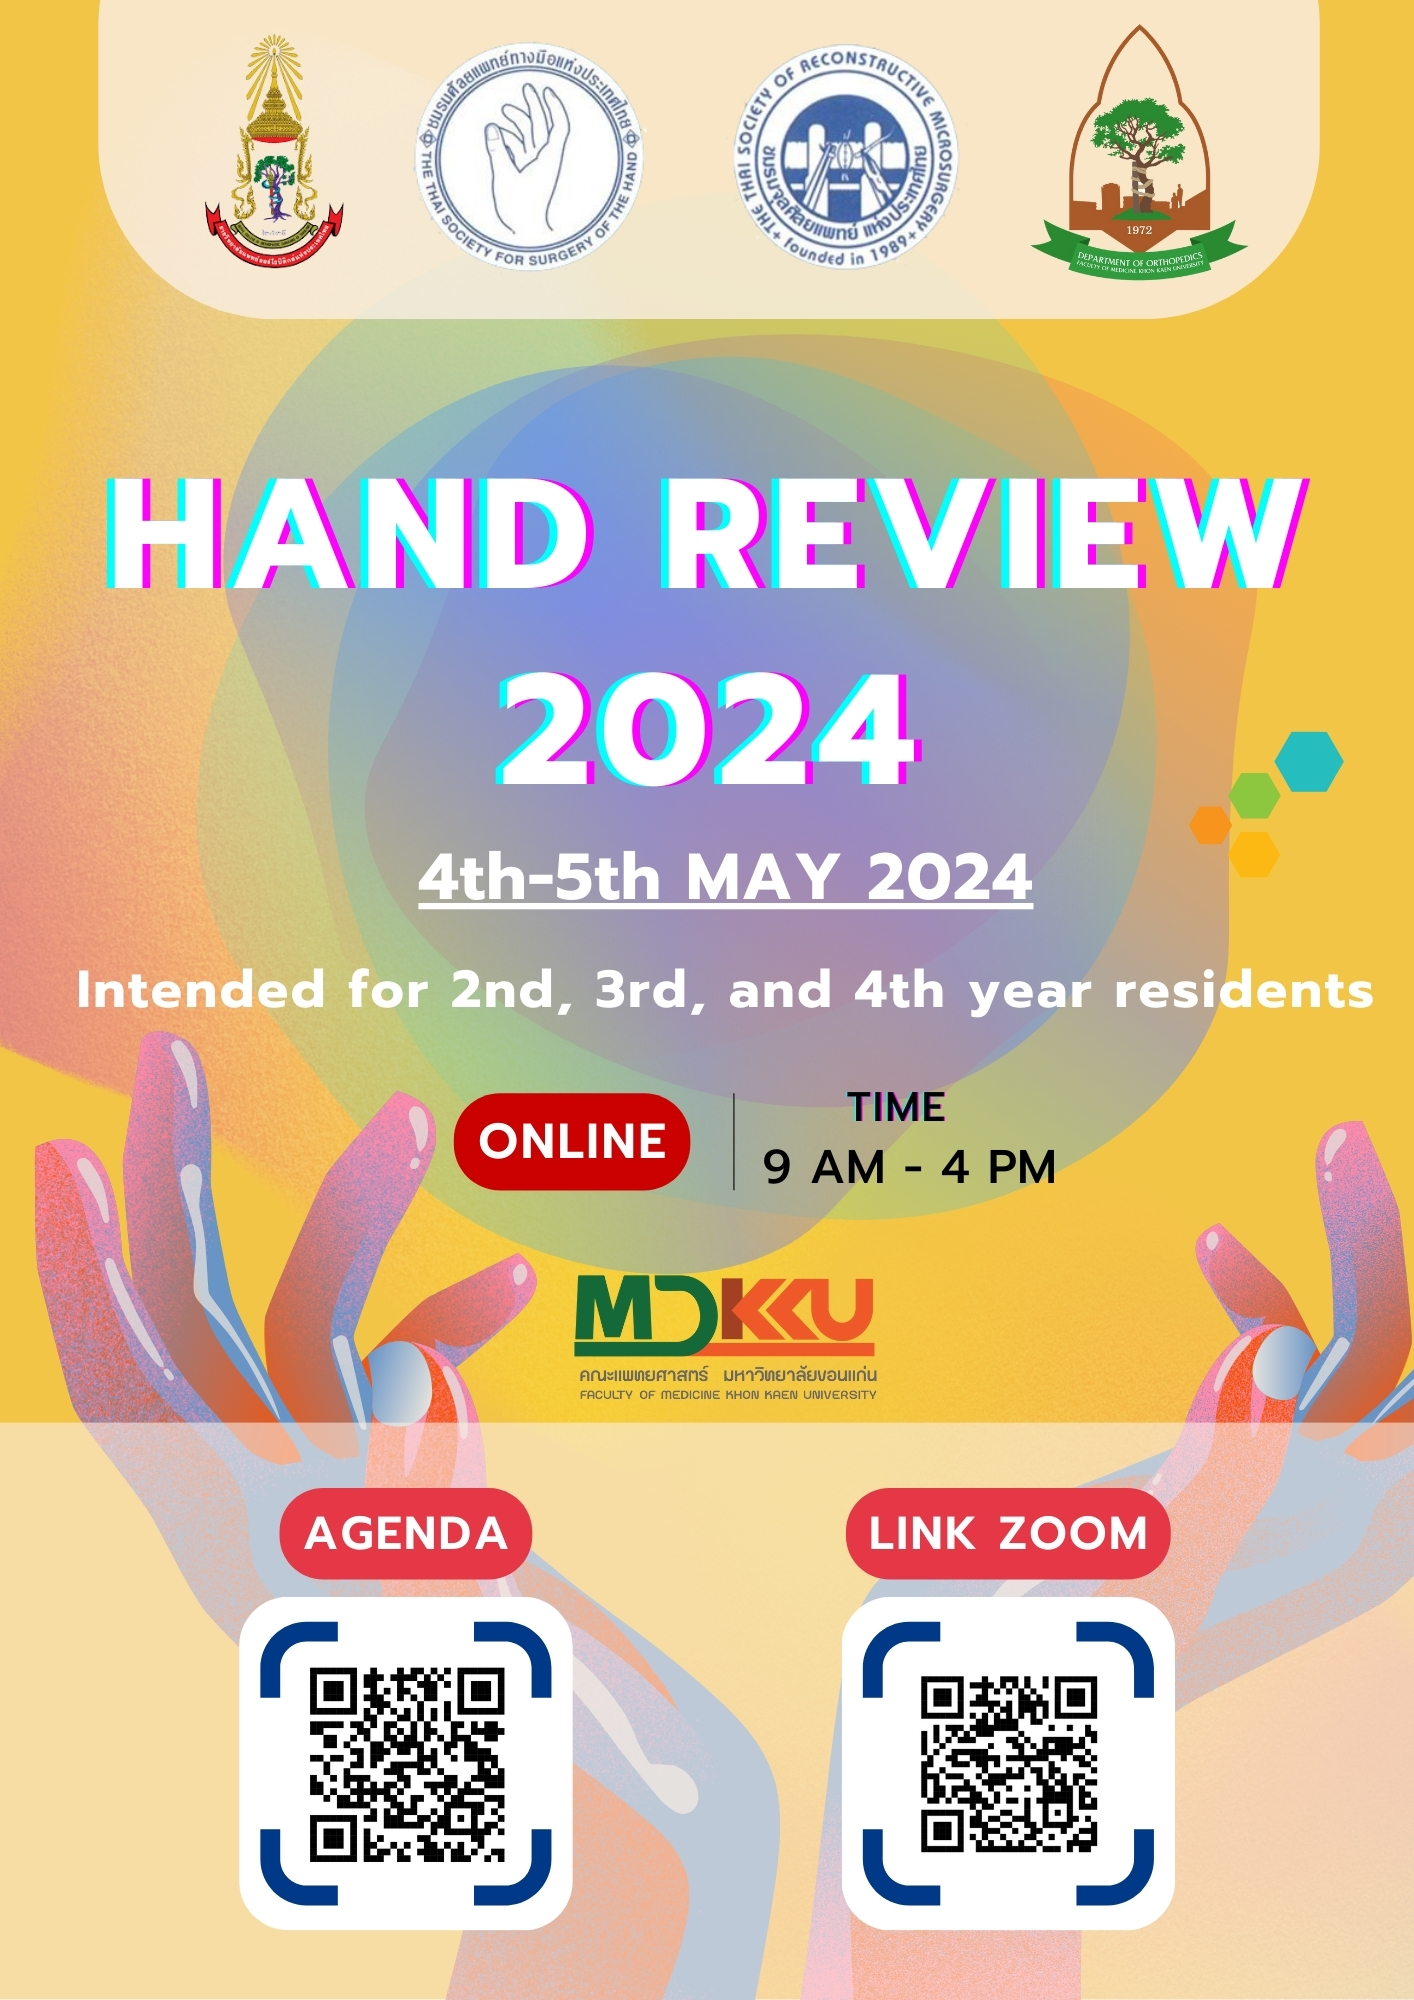 HAND REVIEW 2024